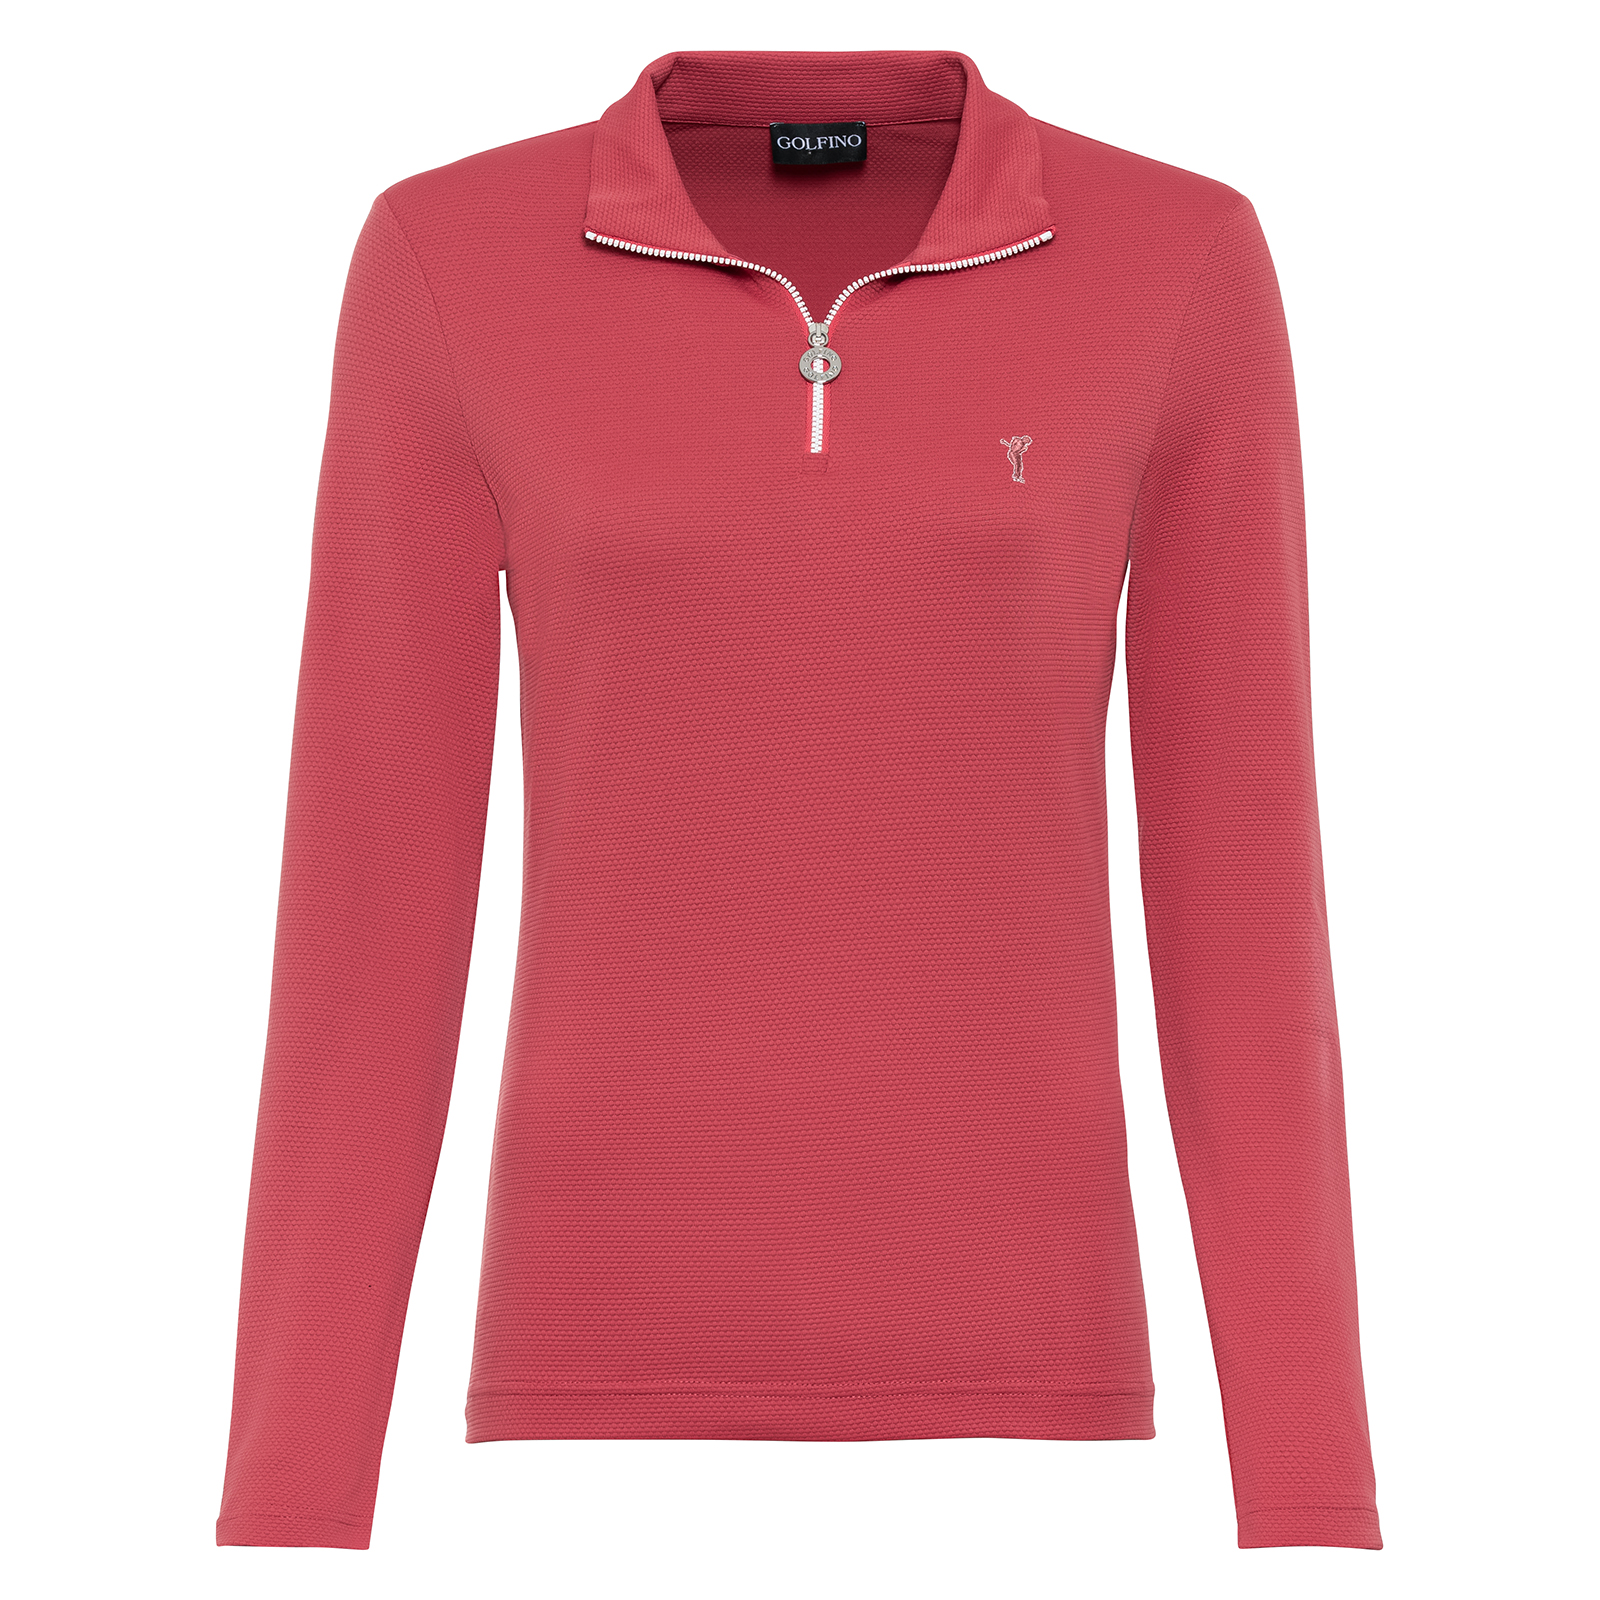 Ladies' long-sleeved bubble jacquard golf top with moisture management function